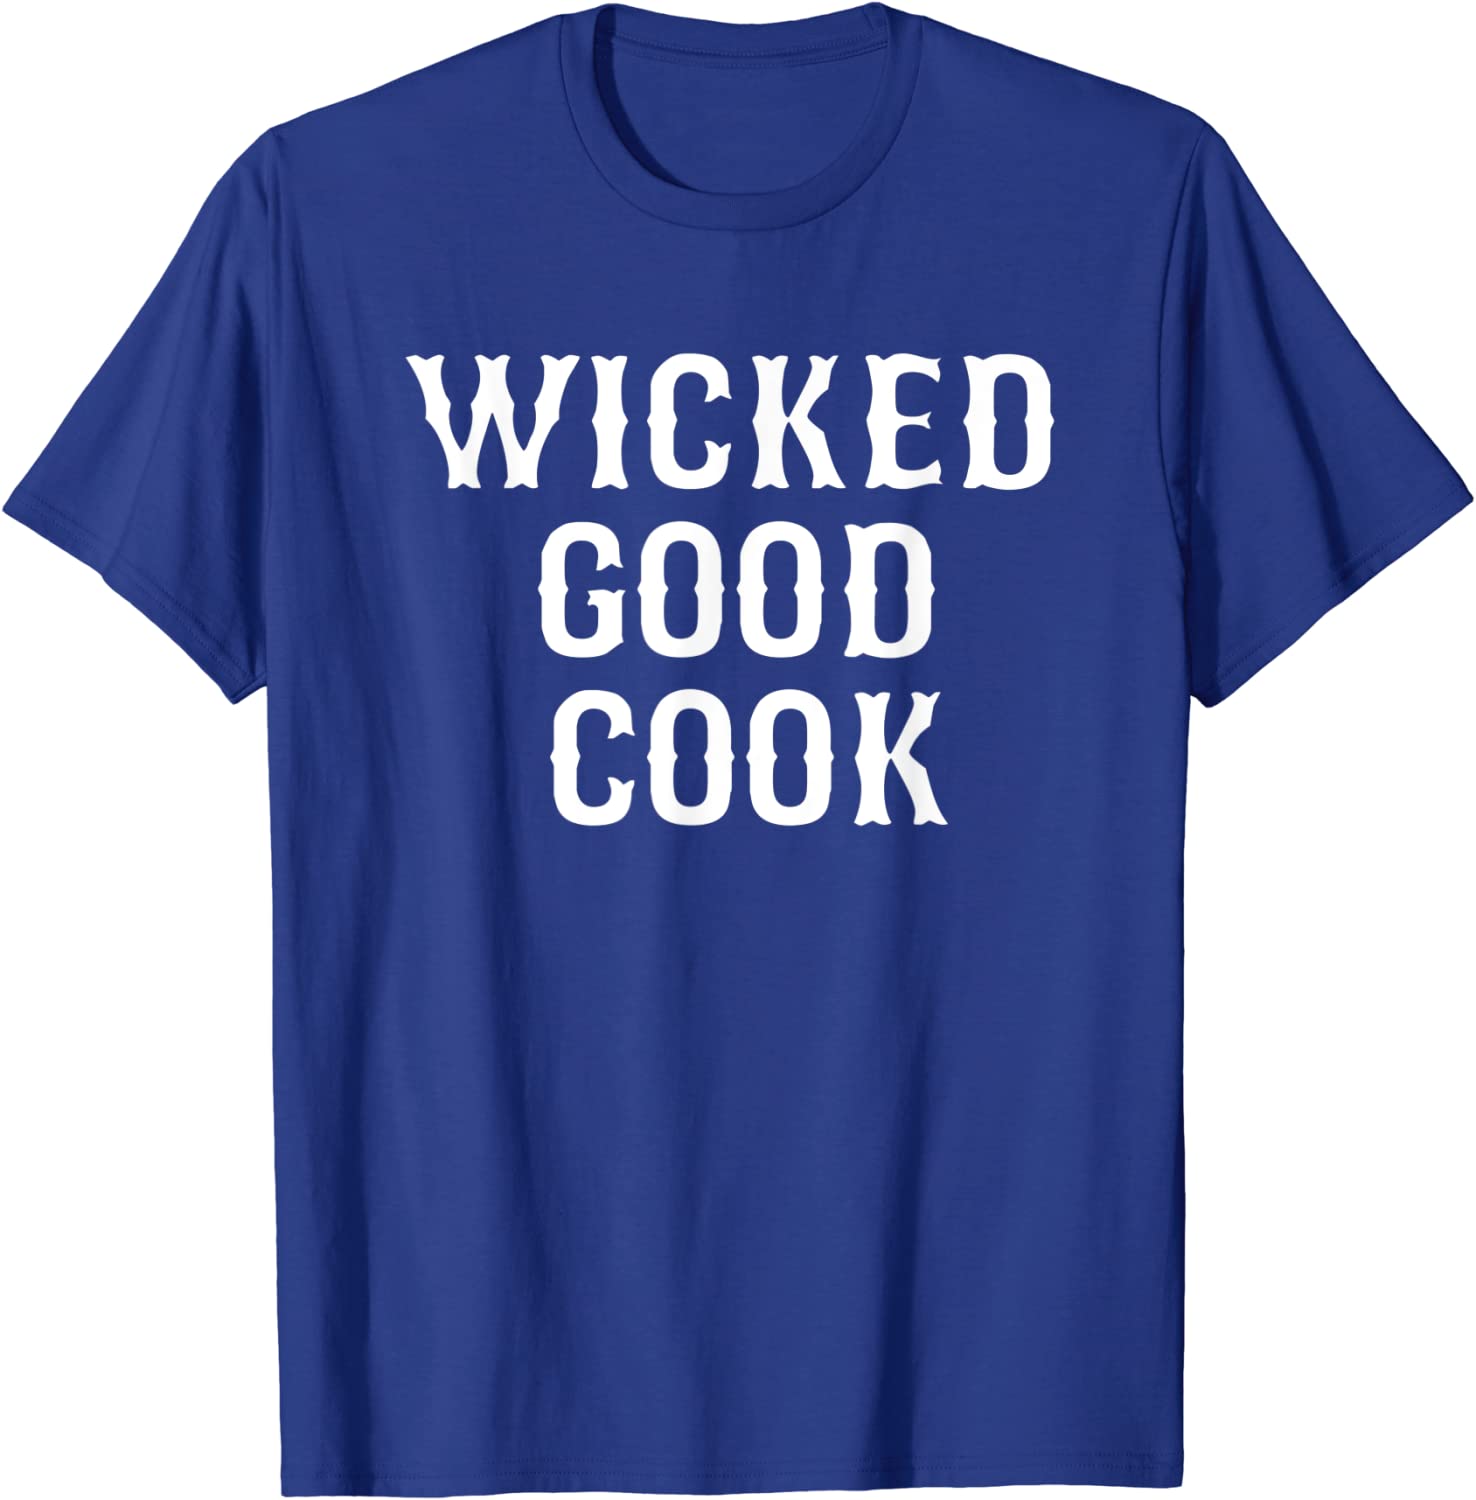 wicked good cook t-shirt